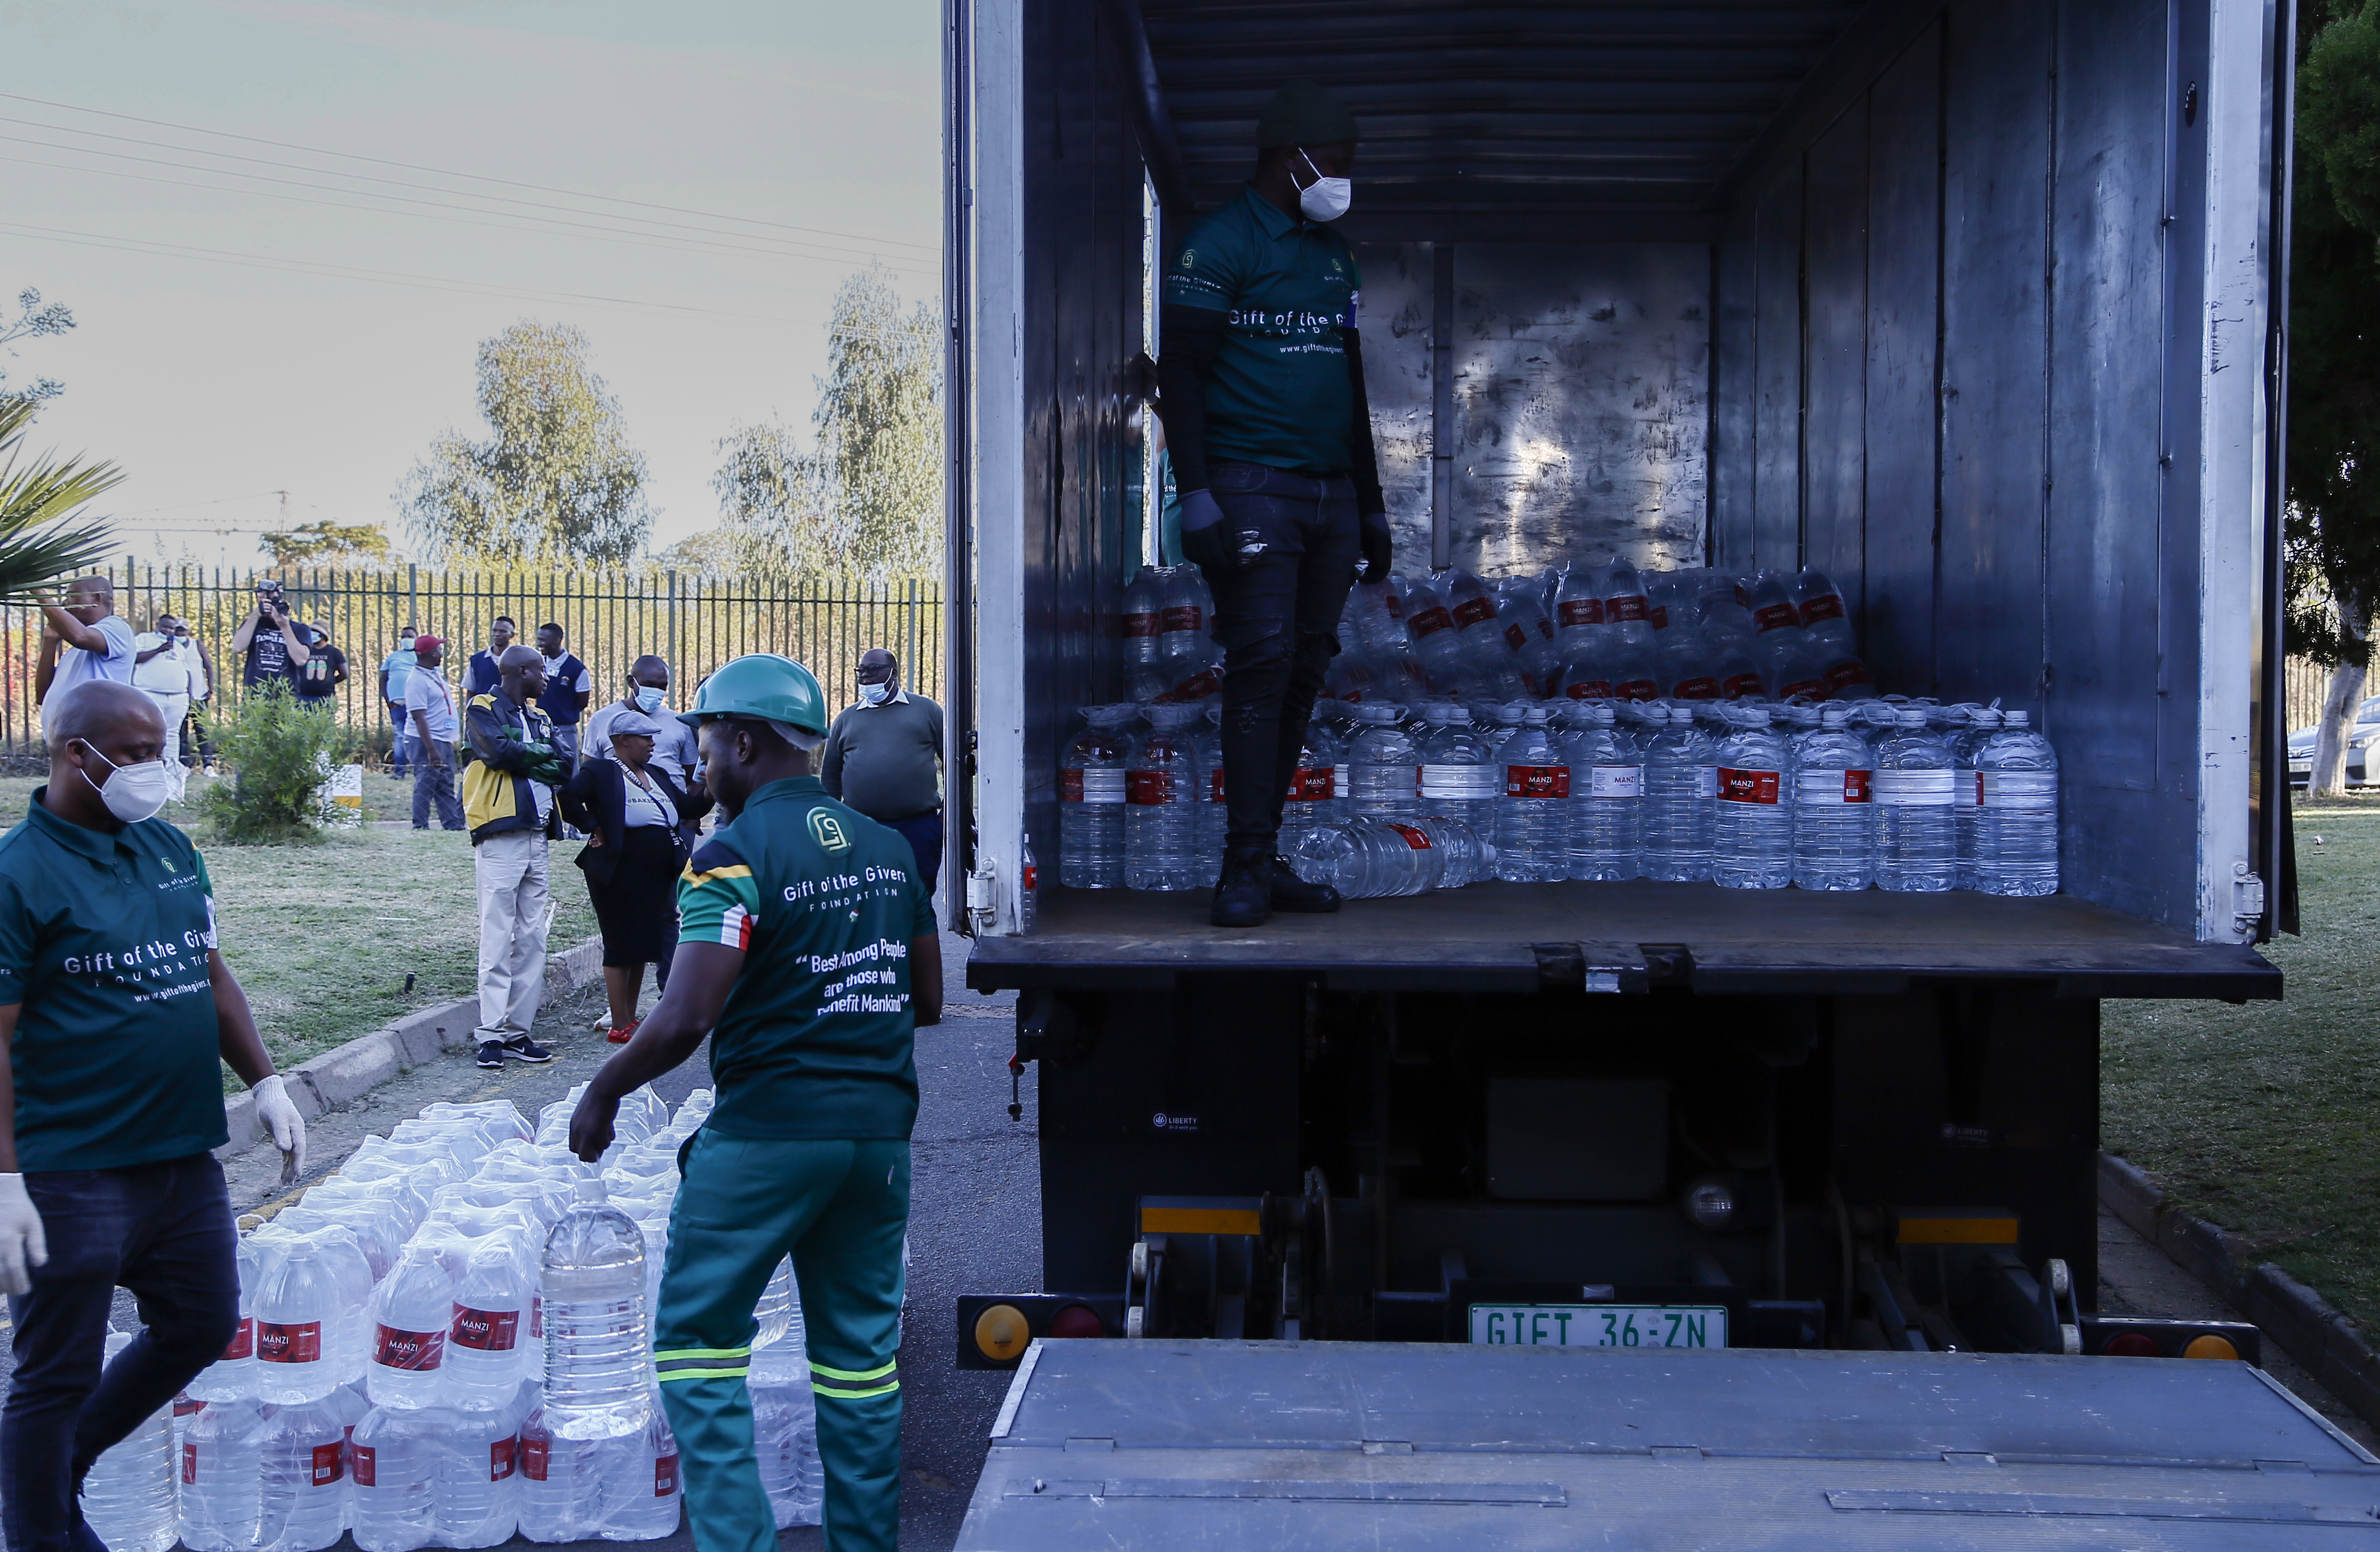 Gift of the Givers aid workers offload water from a truck at Jubilee District Hospital in Hammanskraal where the cholera death toll has risen to 15